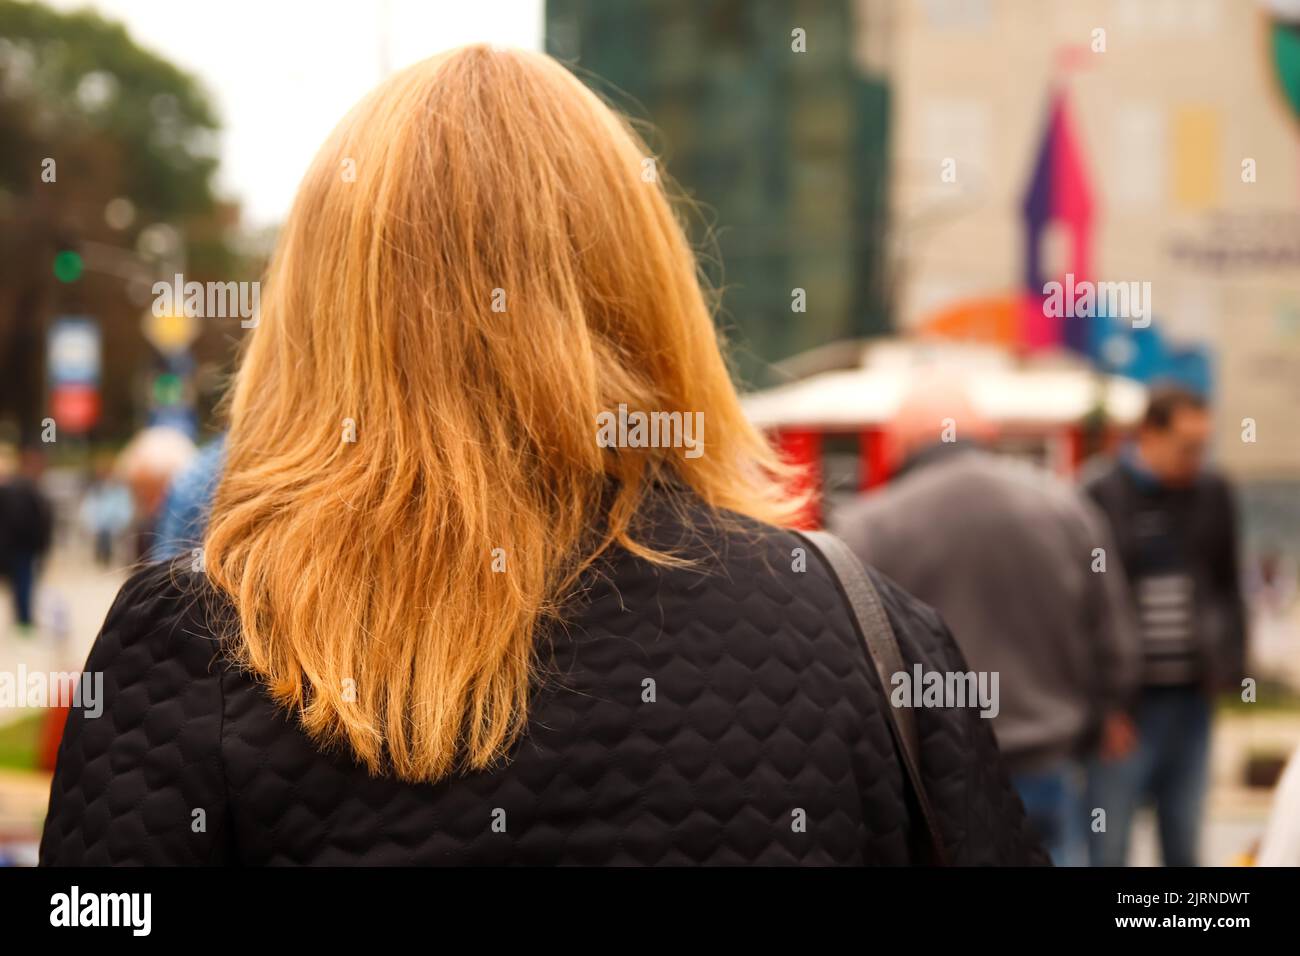 Defocus urban citizen concept. Rear view of blonde woman crossing street in city, with commuters and commercial buildings in background. Closeup one p Stock Photo